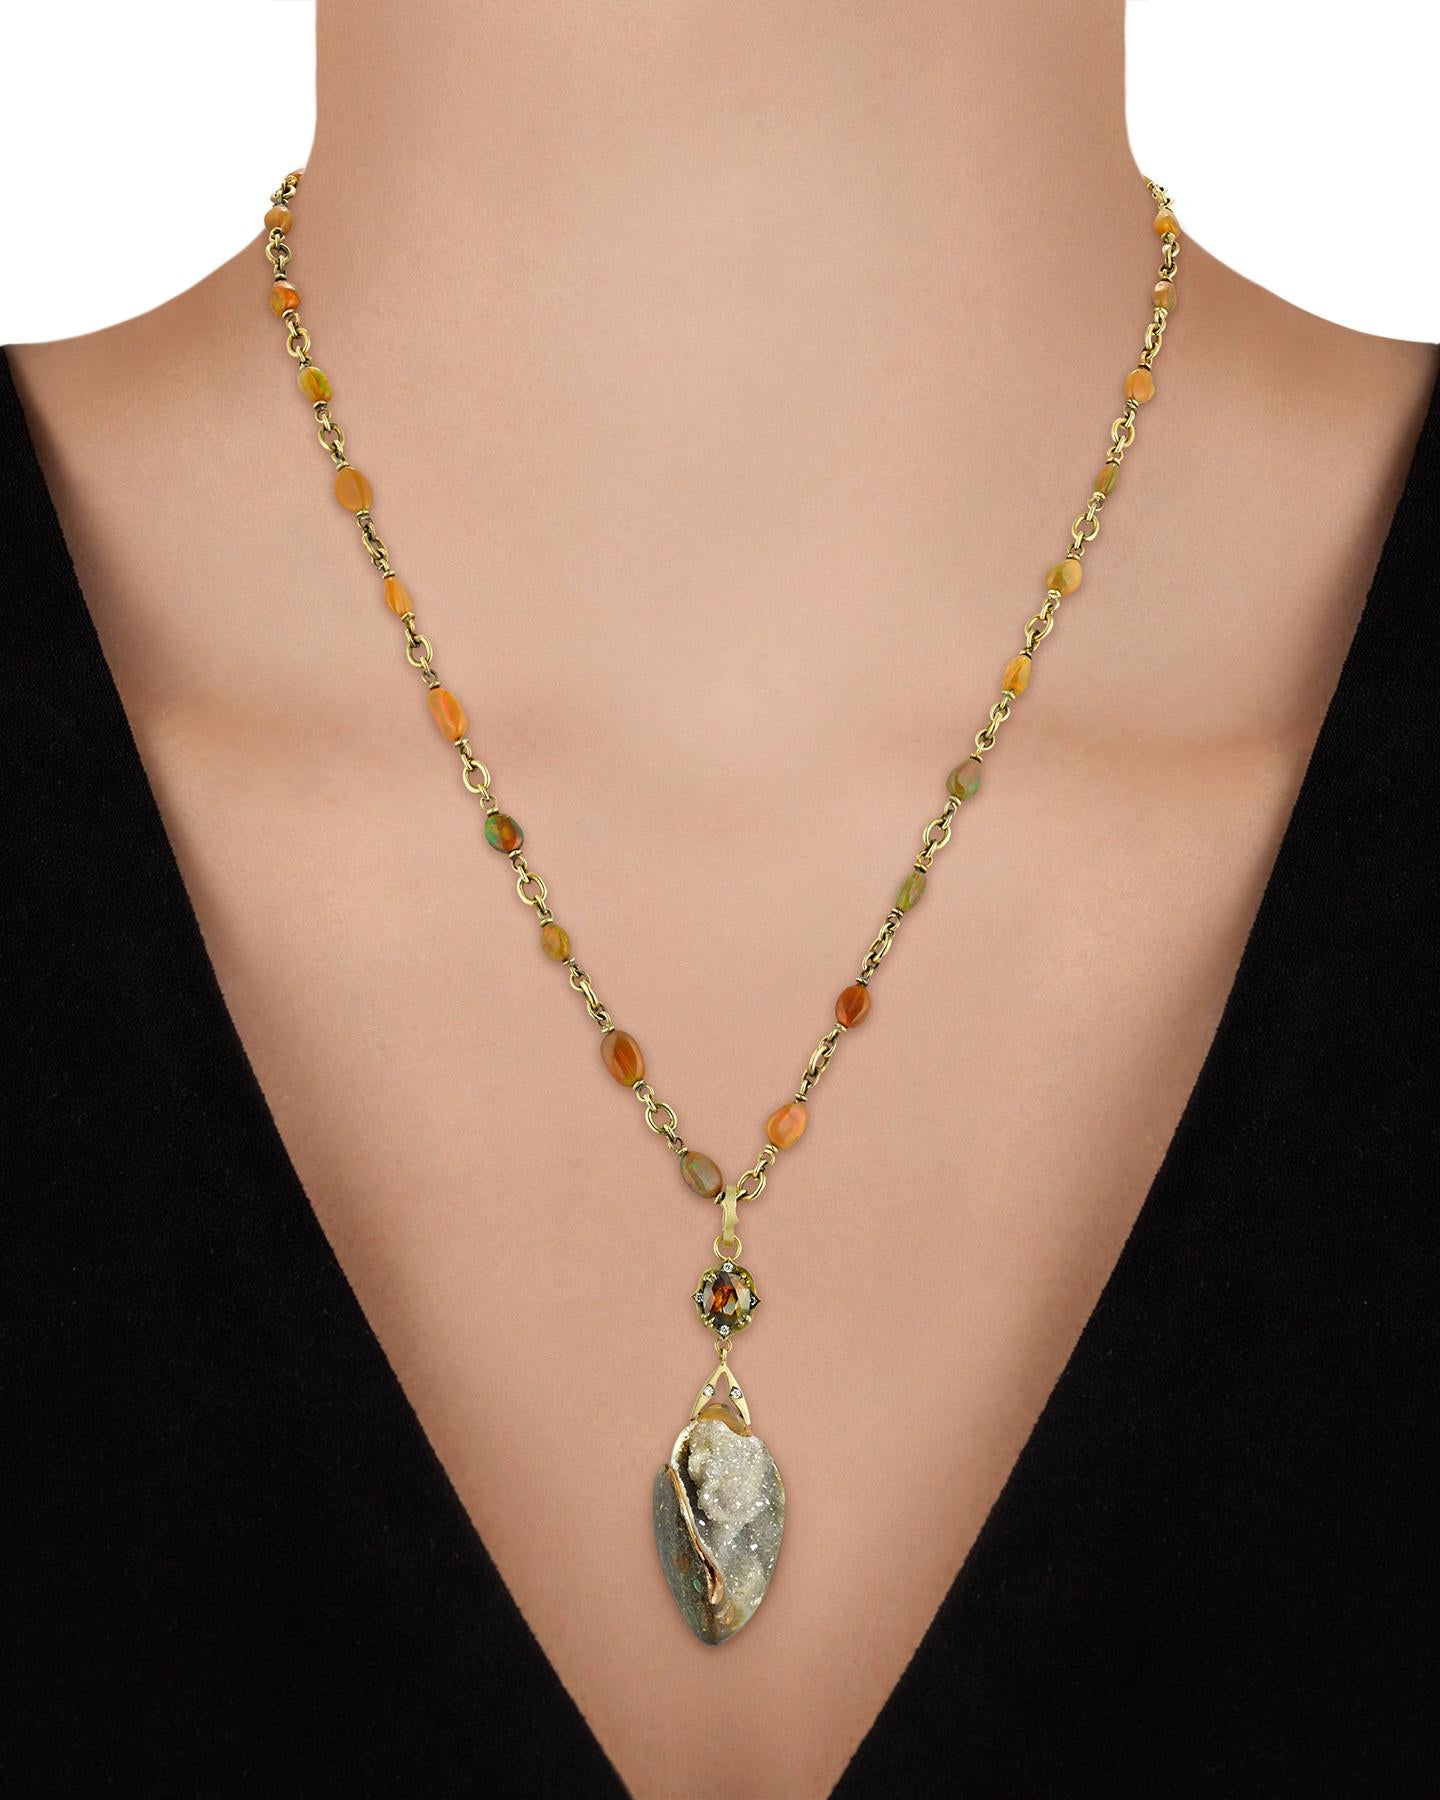 Women's Opal and Crystalized Fossil Necklace